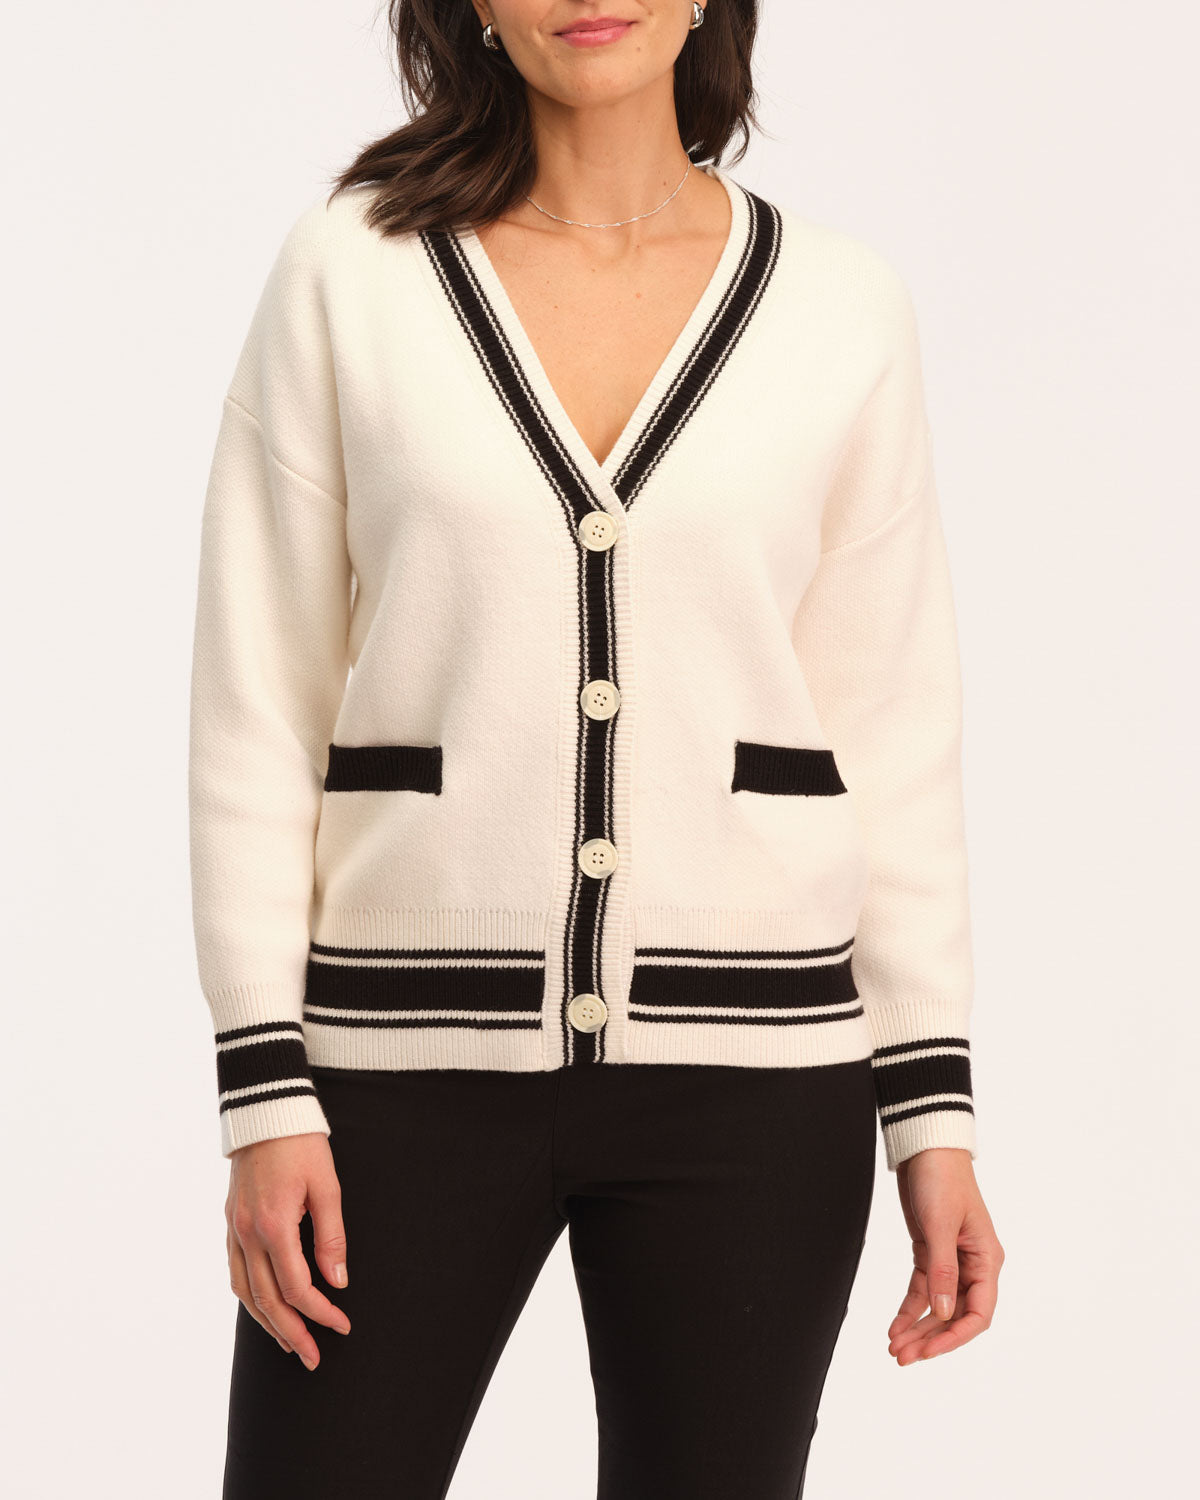 Shop For The Republic Women's V-Neck Contrast Tipped Cardigan | JANE + MERCER